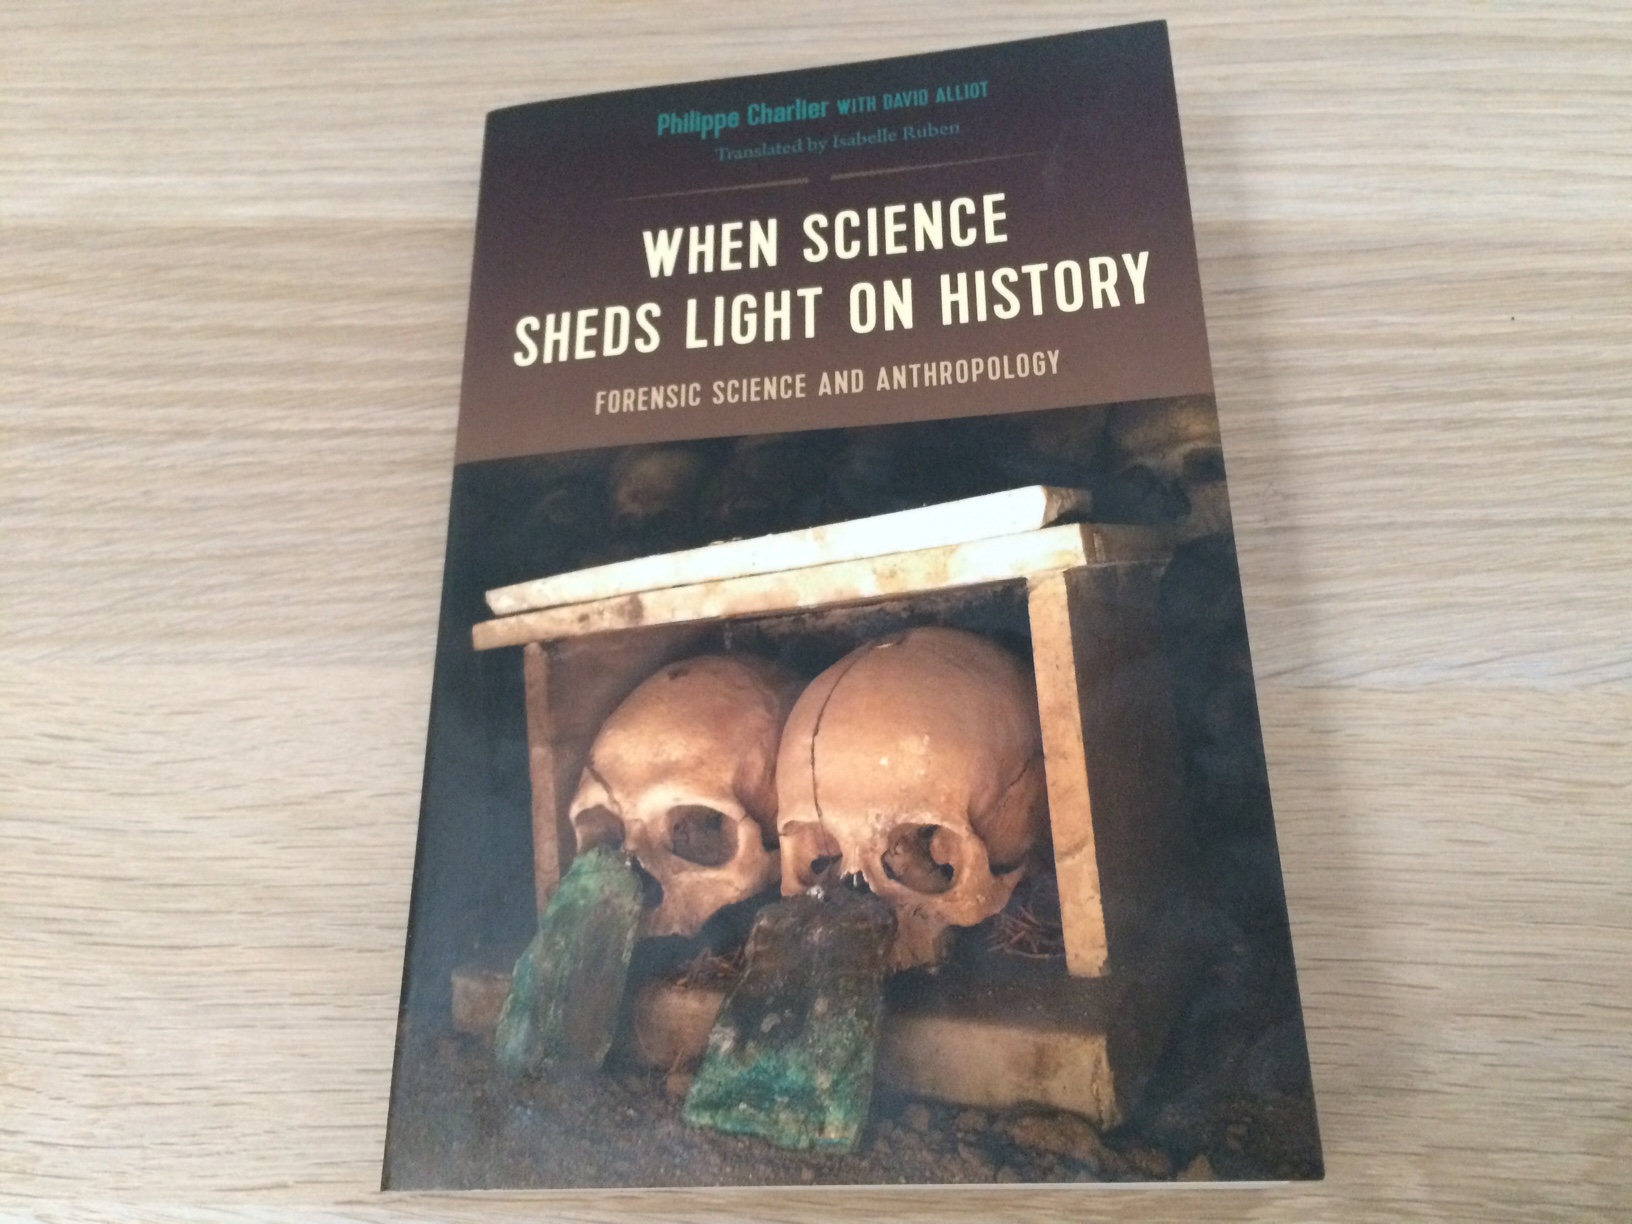 When Science Sheds Light on History - Book Review